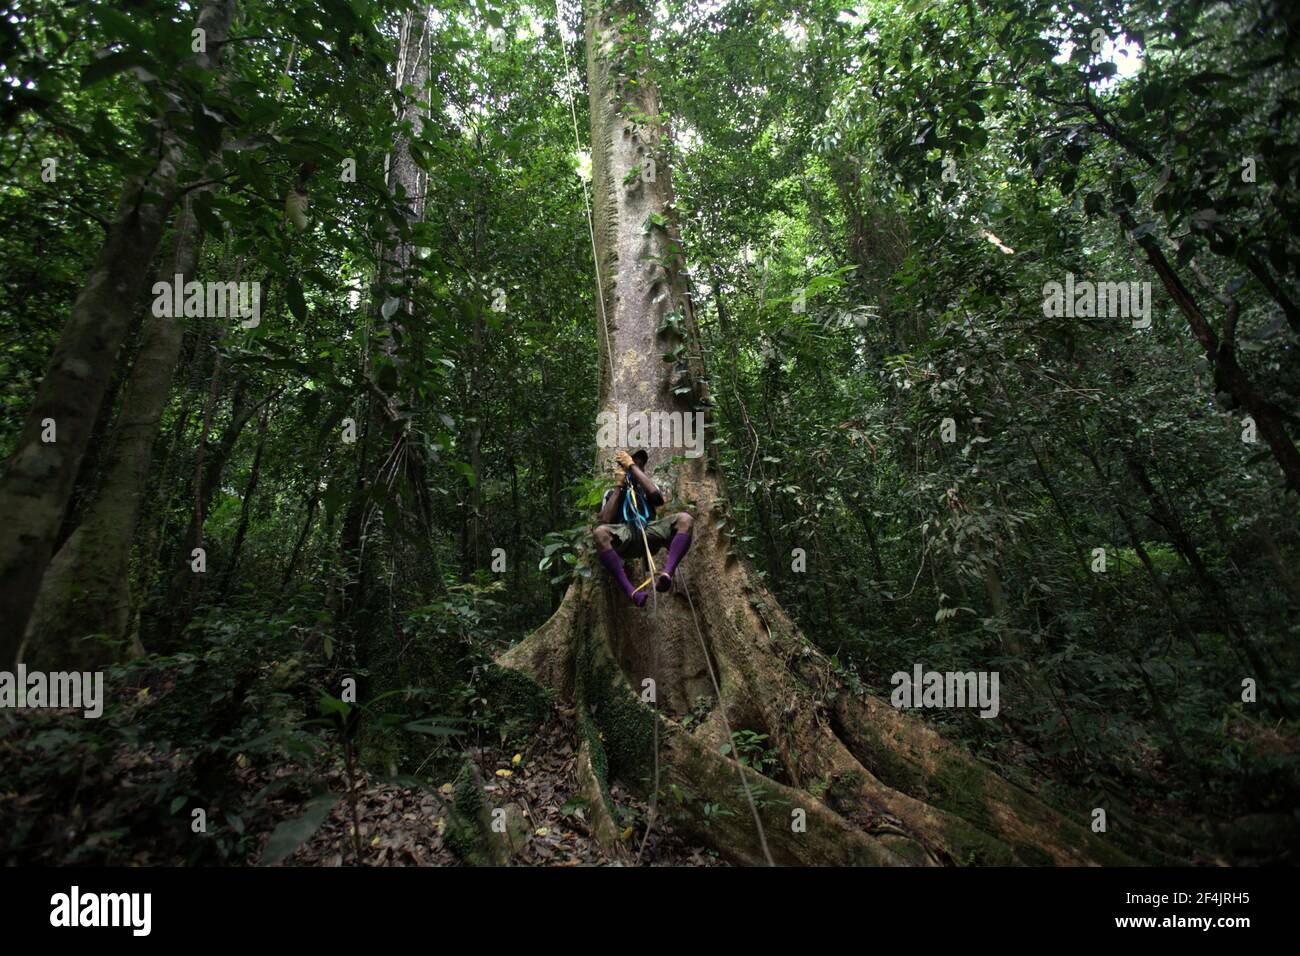 An ecotourism guide ascending a rope to reach a viewing platform built to promote nature conservation, on a tree near Sawai in Central Seram, Maluku province, Indonesia. Restoring or keeping land in its natural form is generally more economically beneficial than converting land for human activities like logging or agriculture, Inside Climate News reported on March 13, 2021, boldly saying that 'on most natural lands, development is a money loser.' Stock Photo